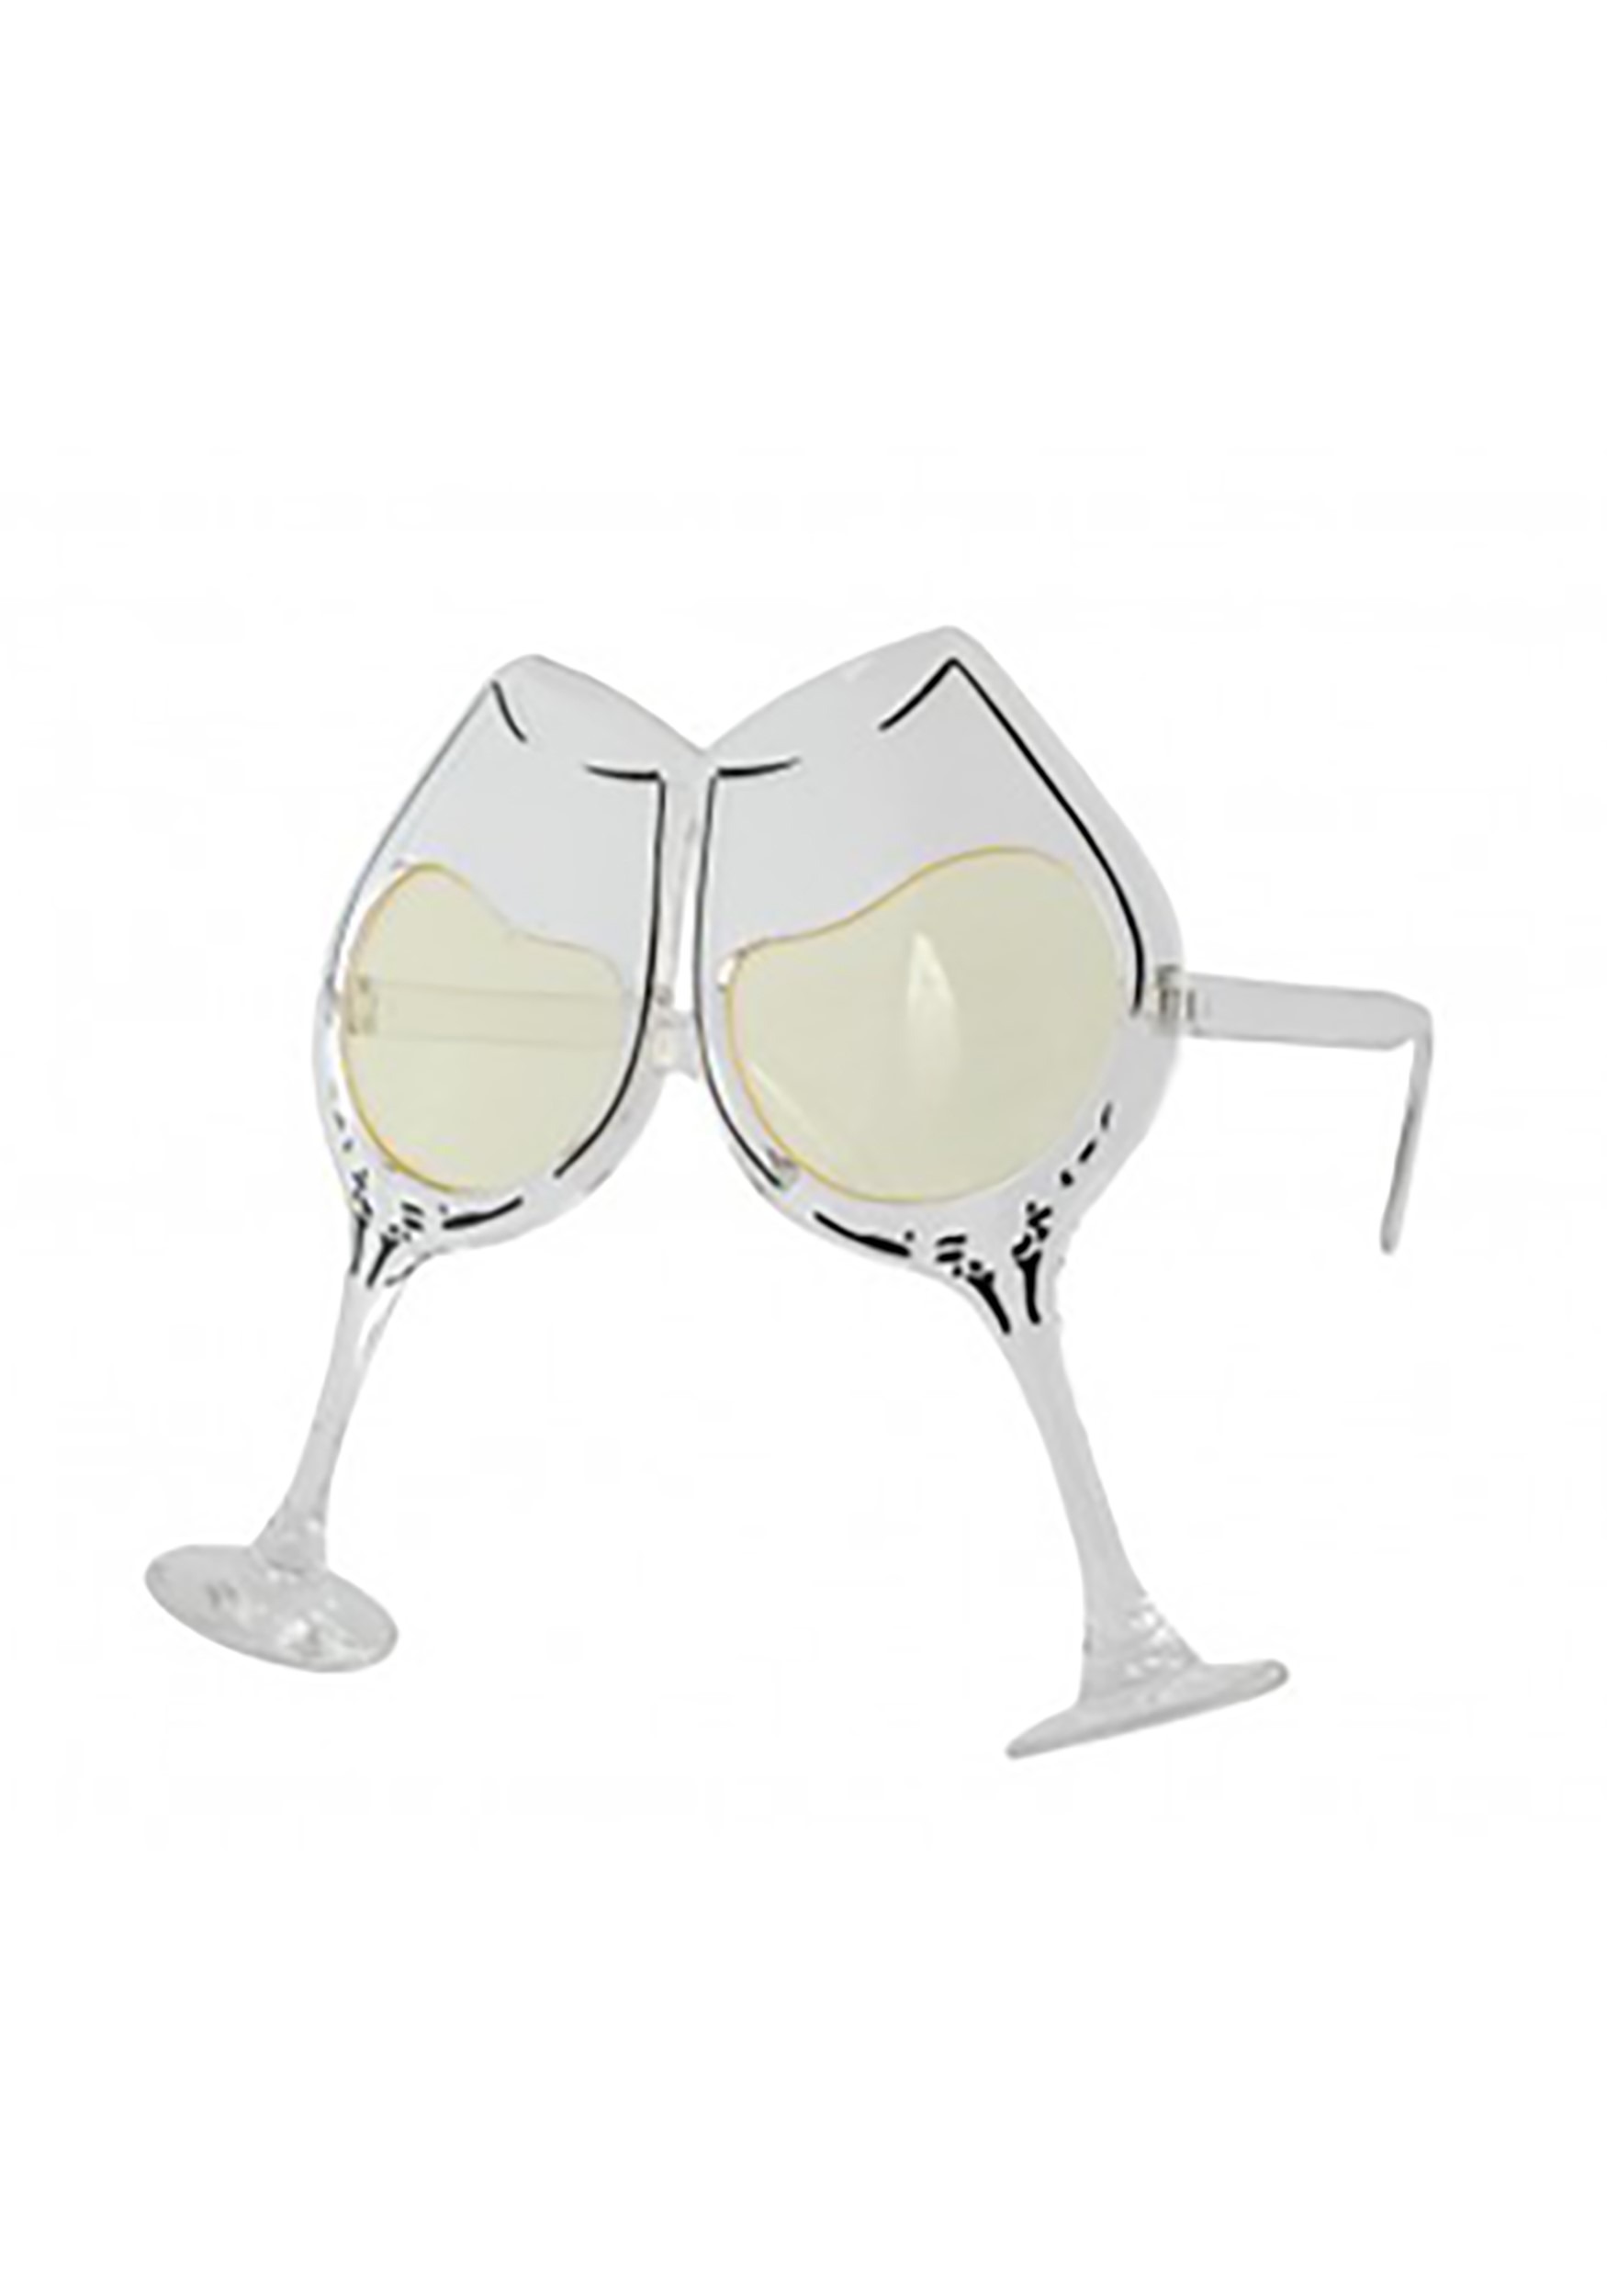 Wine Goblet Clear/Yellow Eyeglasses